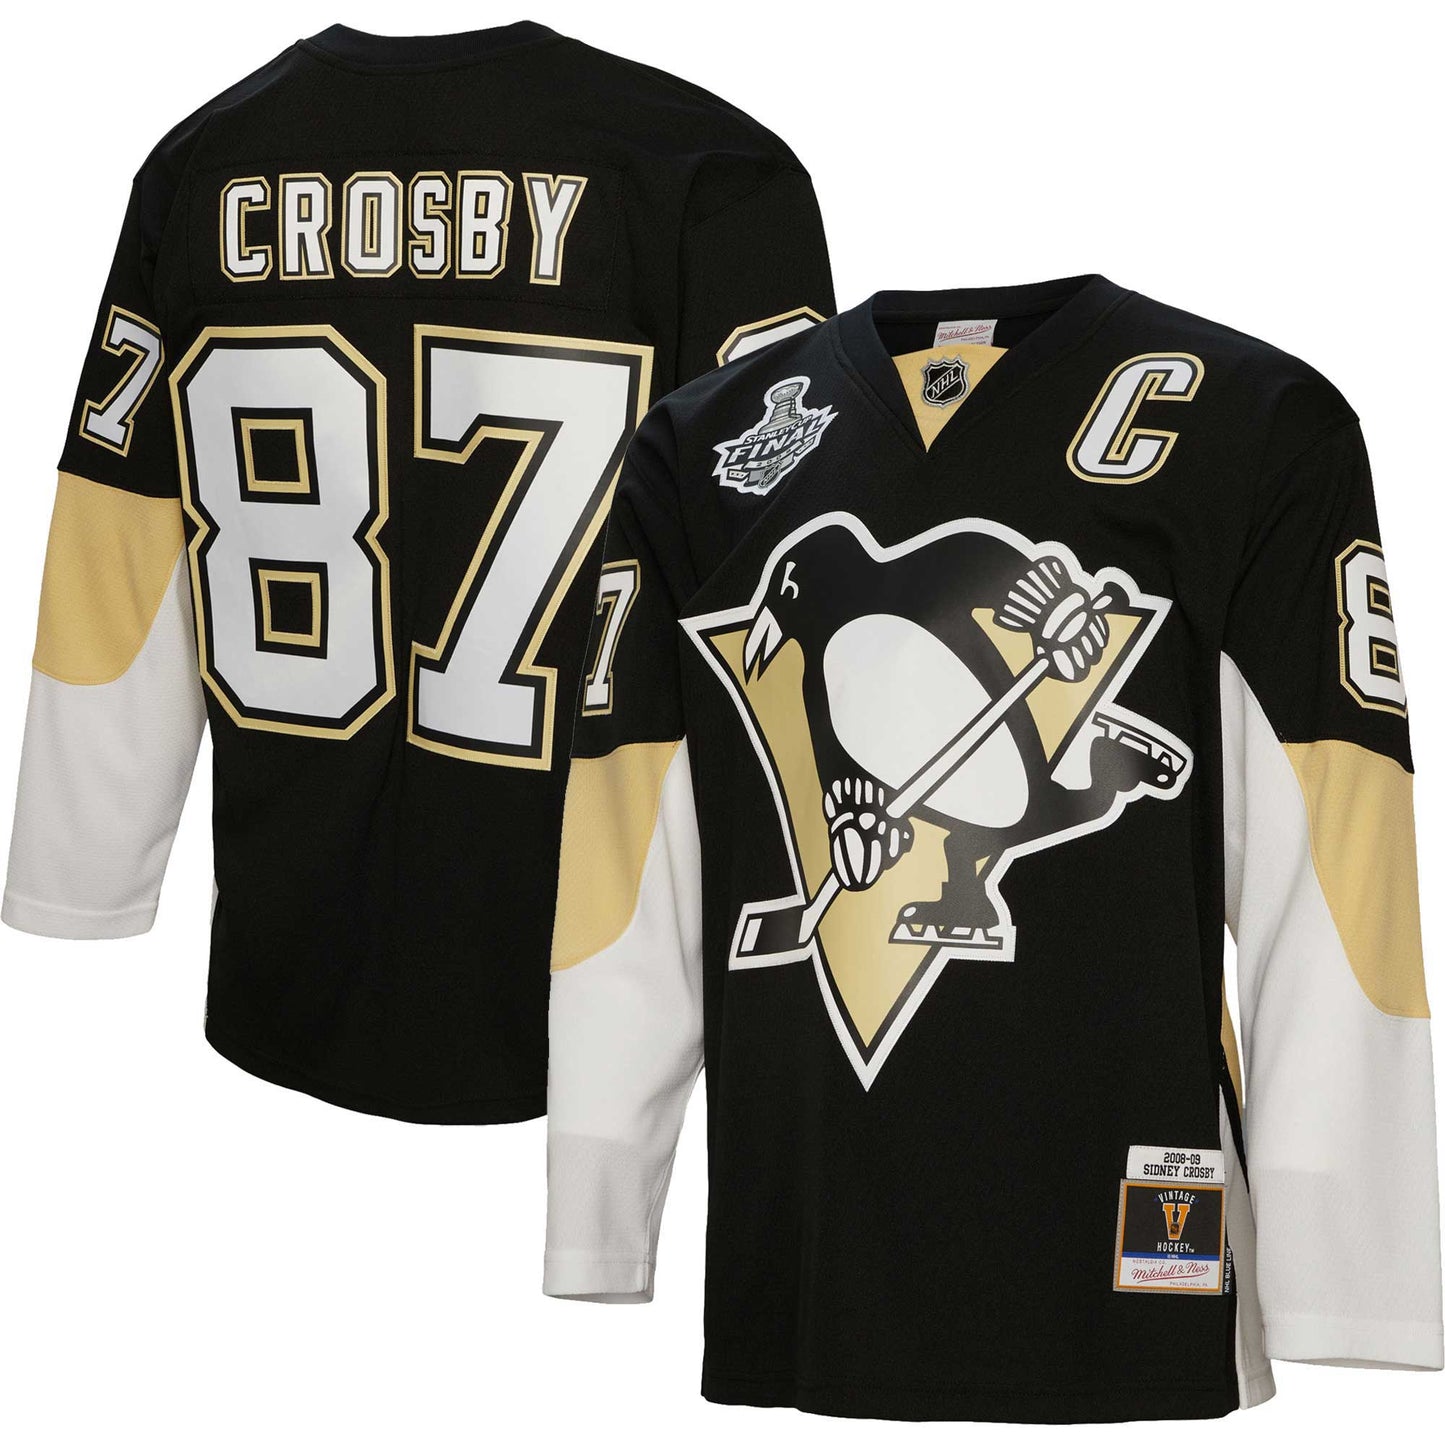 Sidney Crosby Pittsburgh Penguins Mitchell & Ness 2008/09 Captain Patch Blue Line Player Jersey - Black